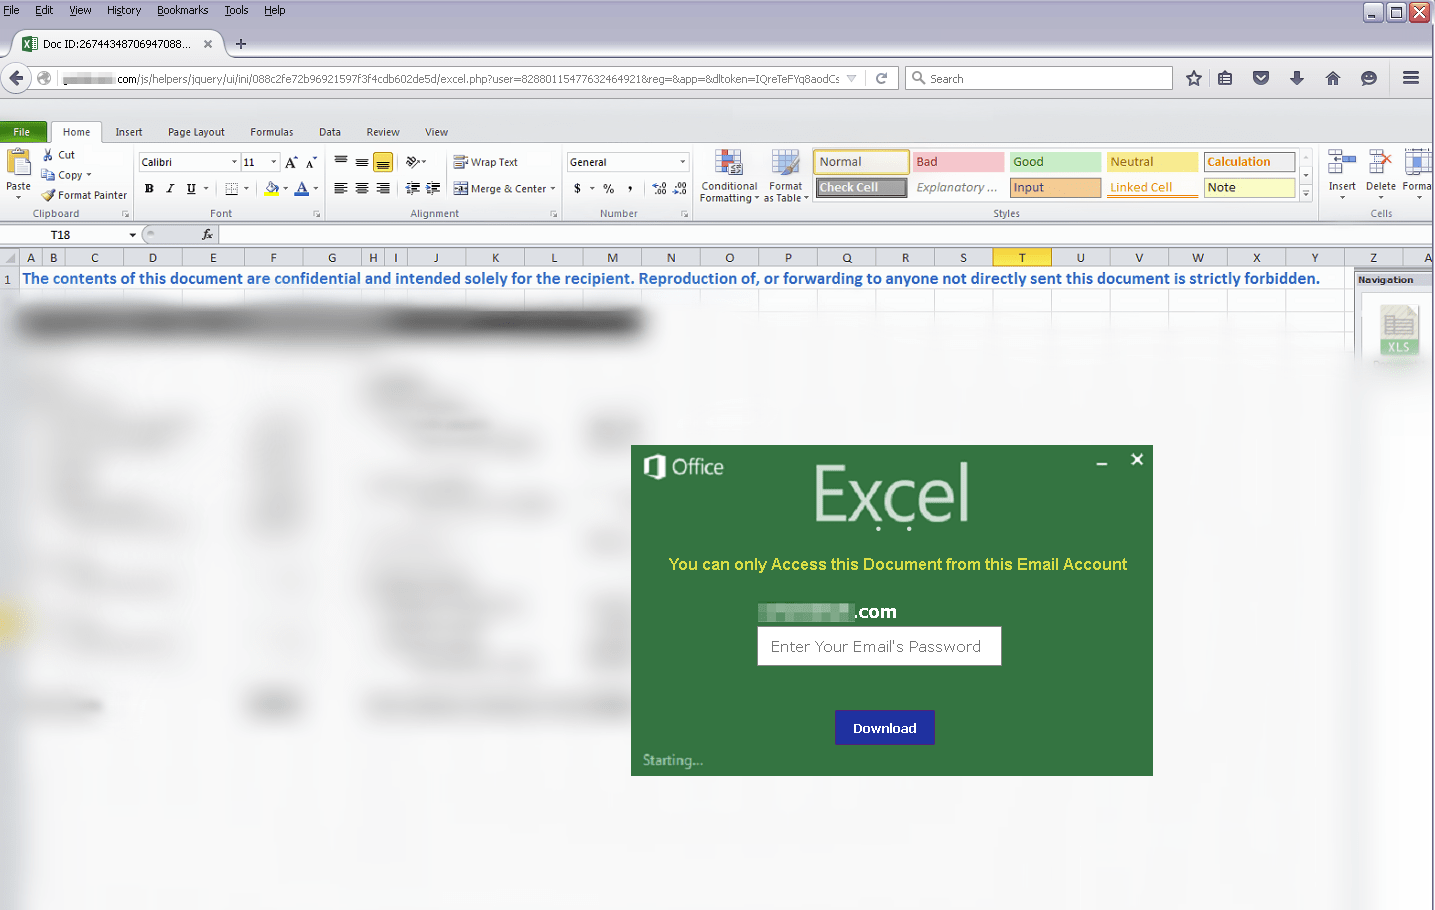 Excel-themed credential phishing lure